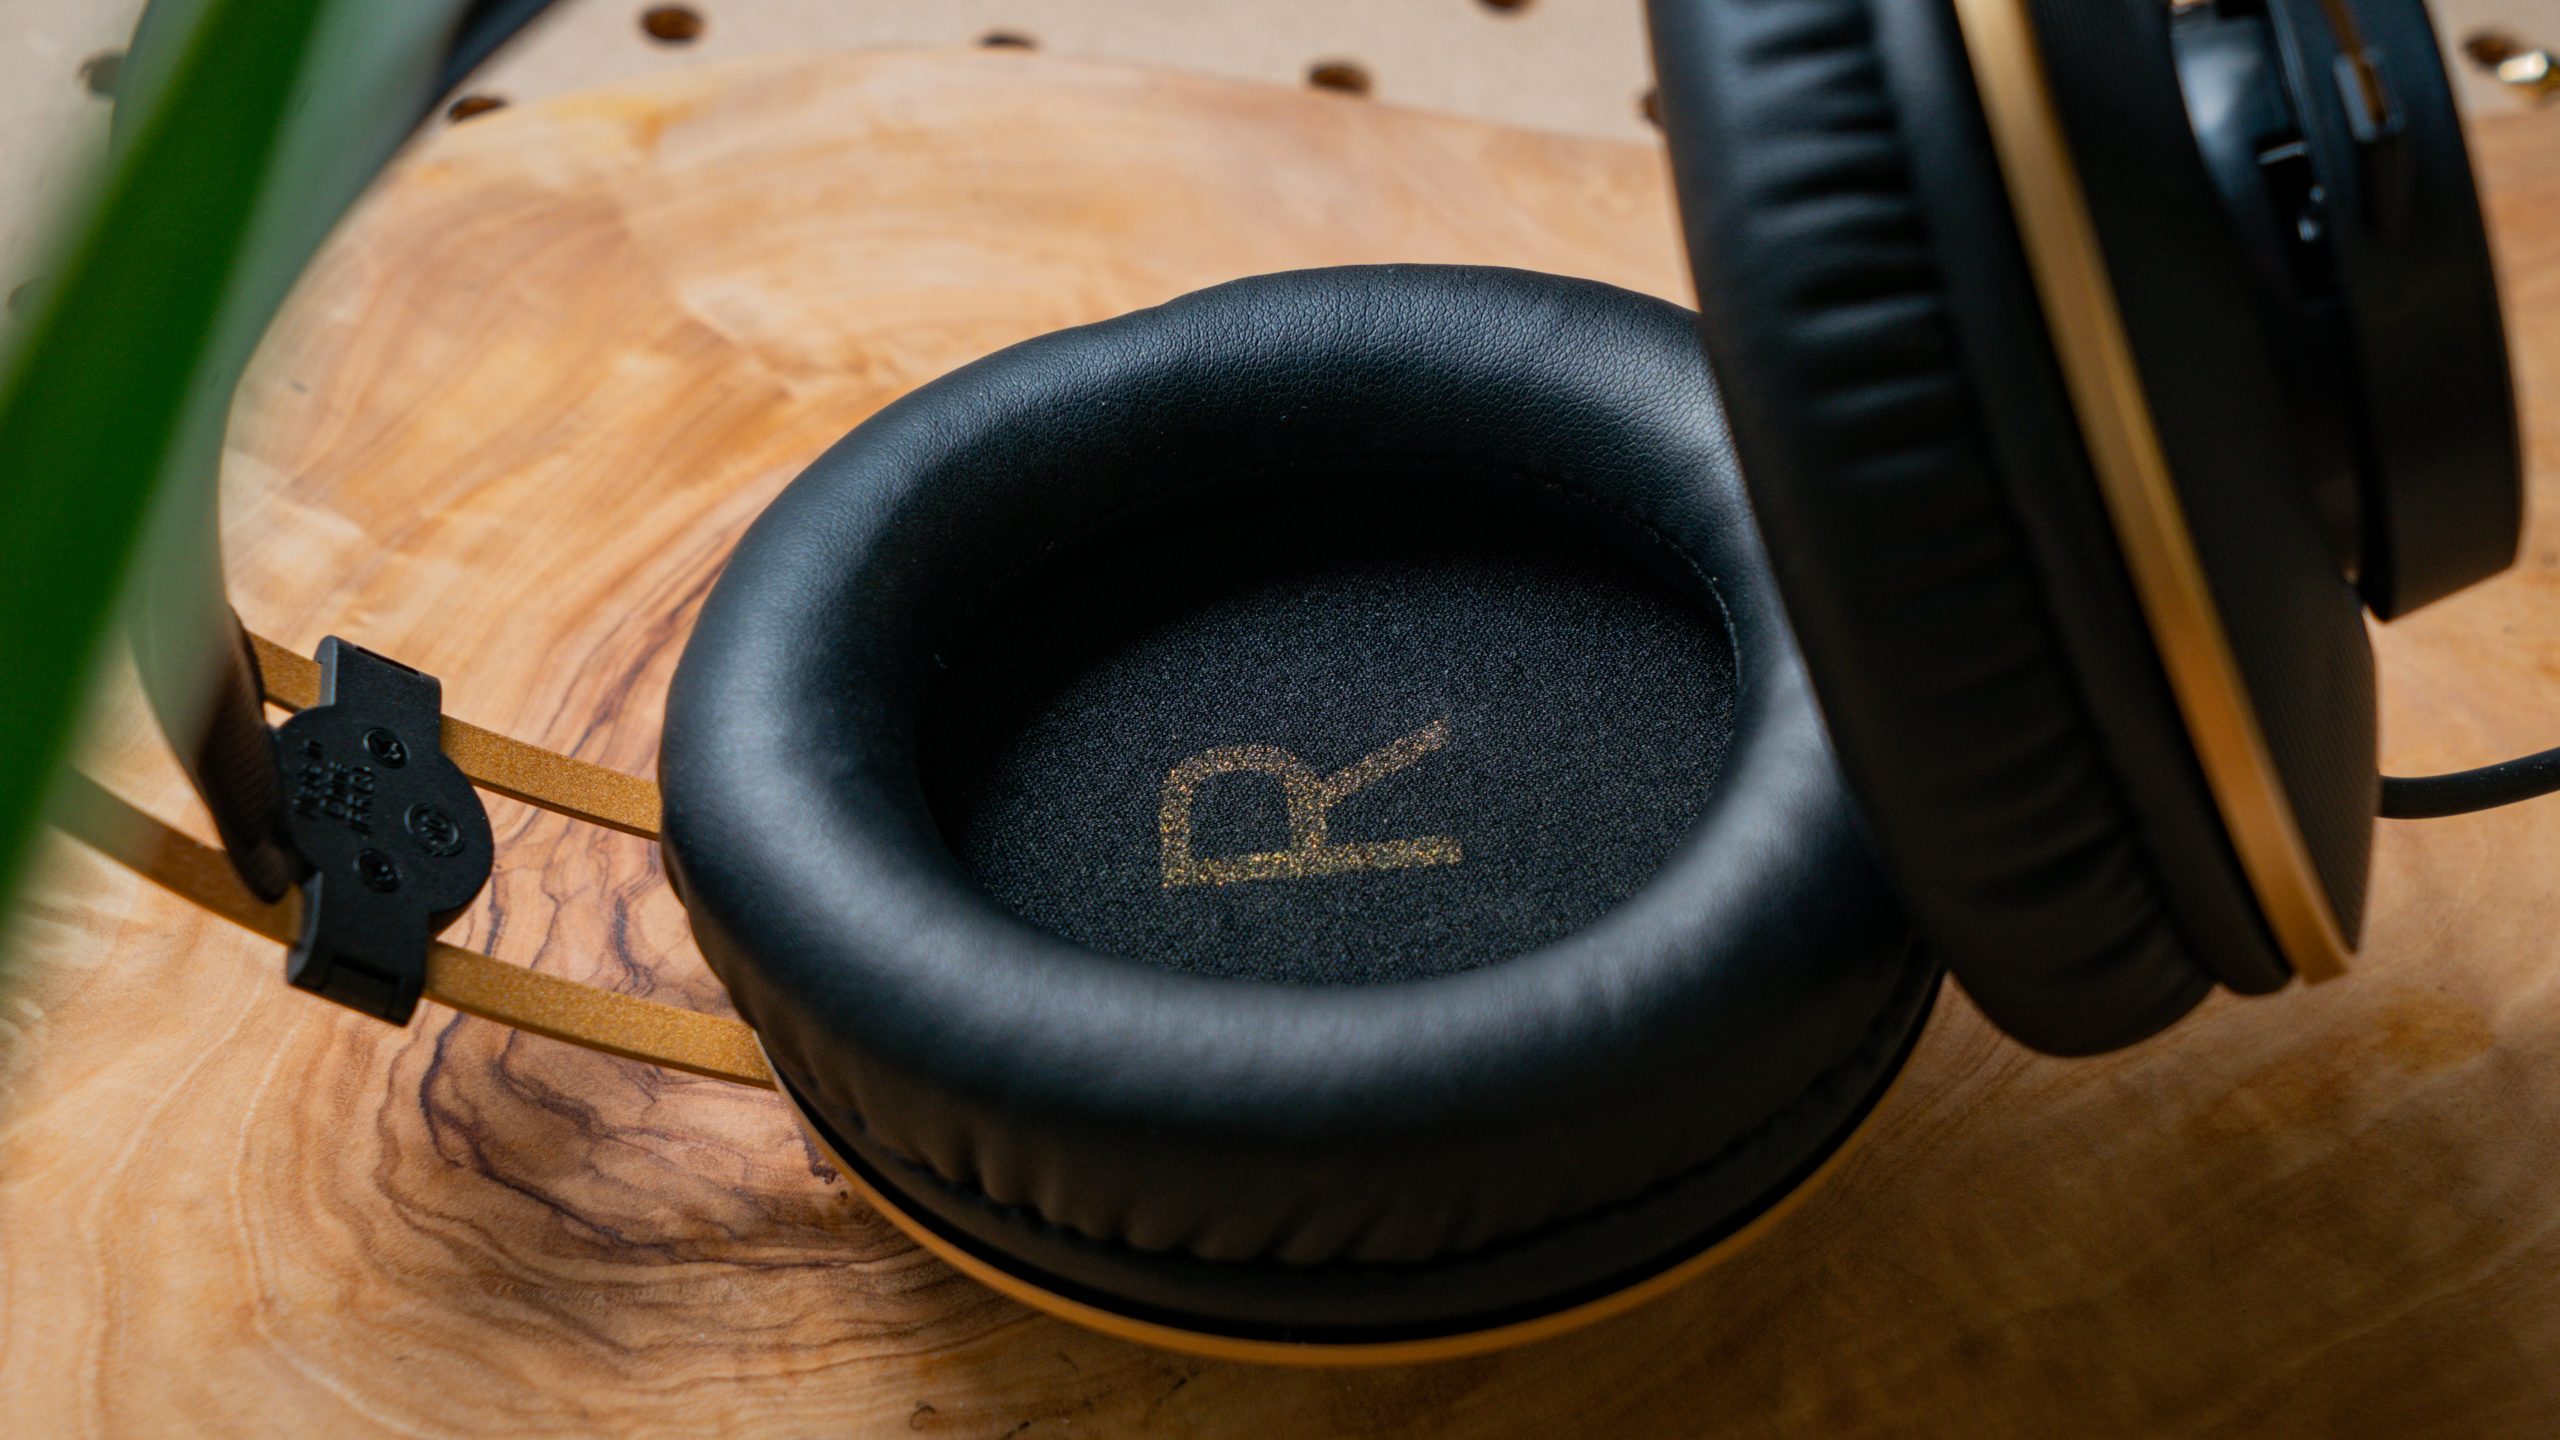 A photo of the inside of the AKG K92's large ear cup.